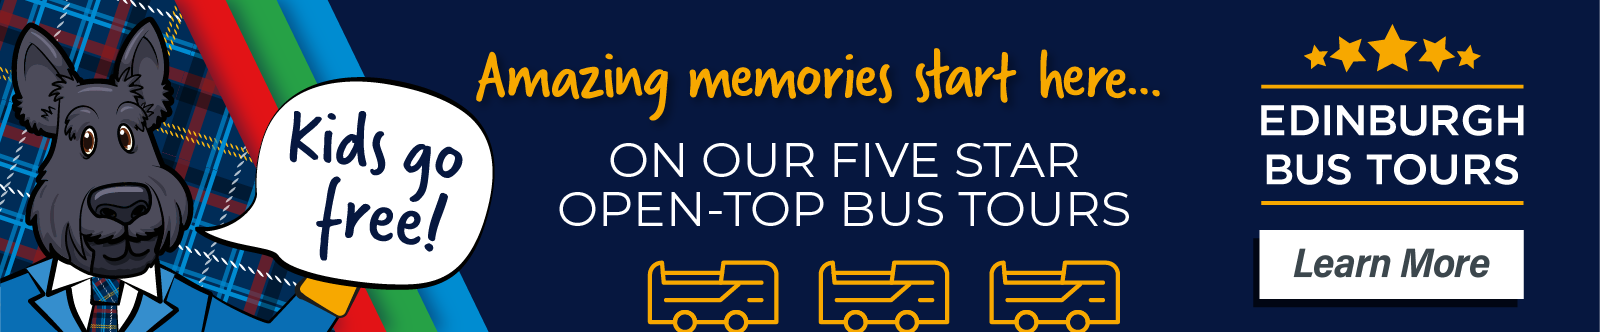 Amazing memories start here on our five star open-top bus tours. Kids go free! Click to learn more.